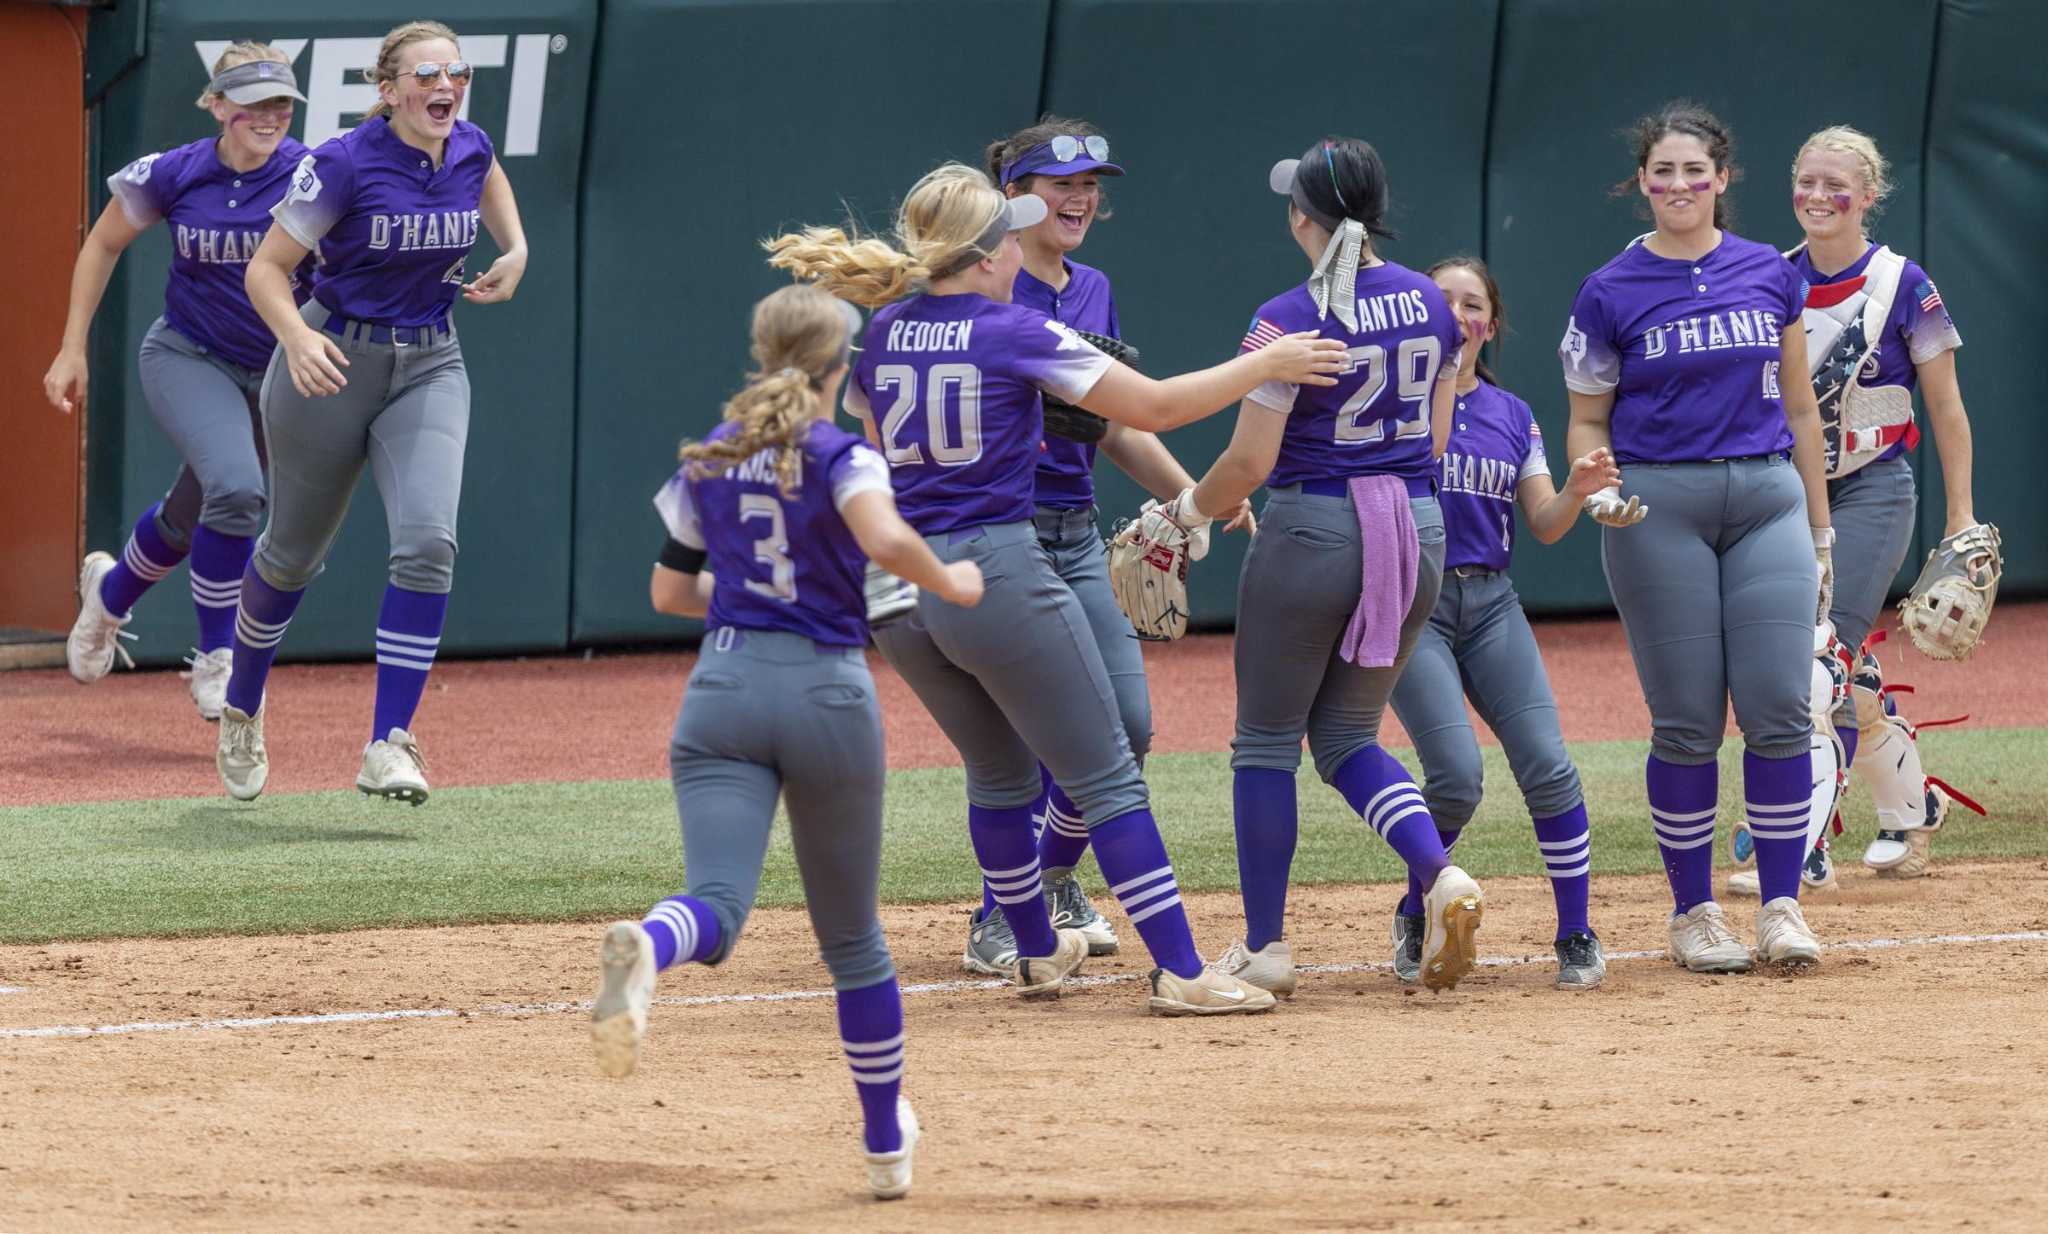 Big inning sparks D’Hanis’ victory over Borden County in UIL state